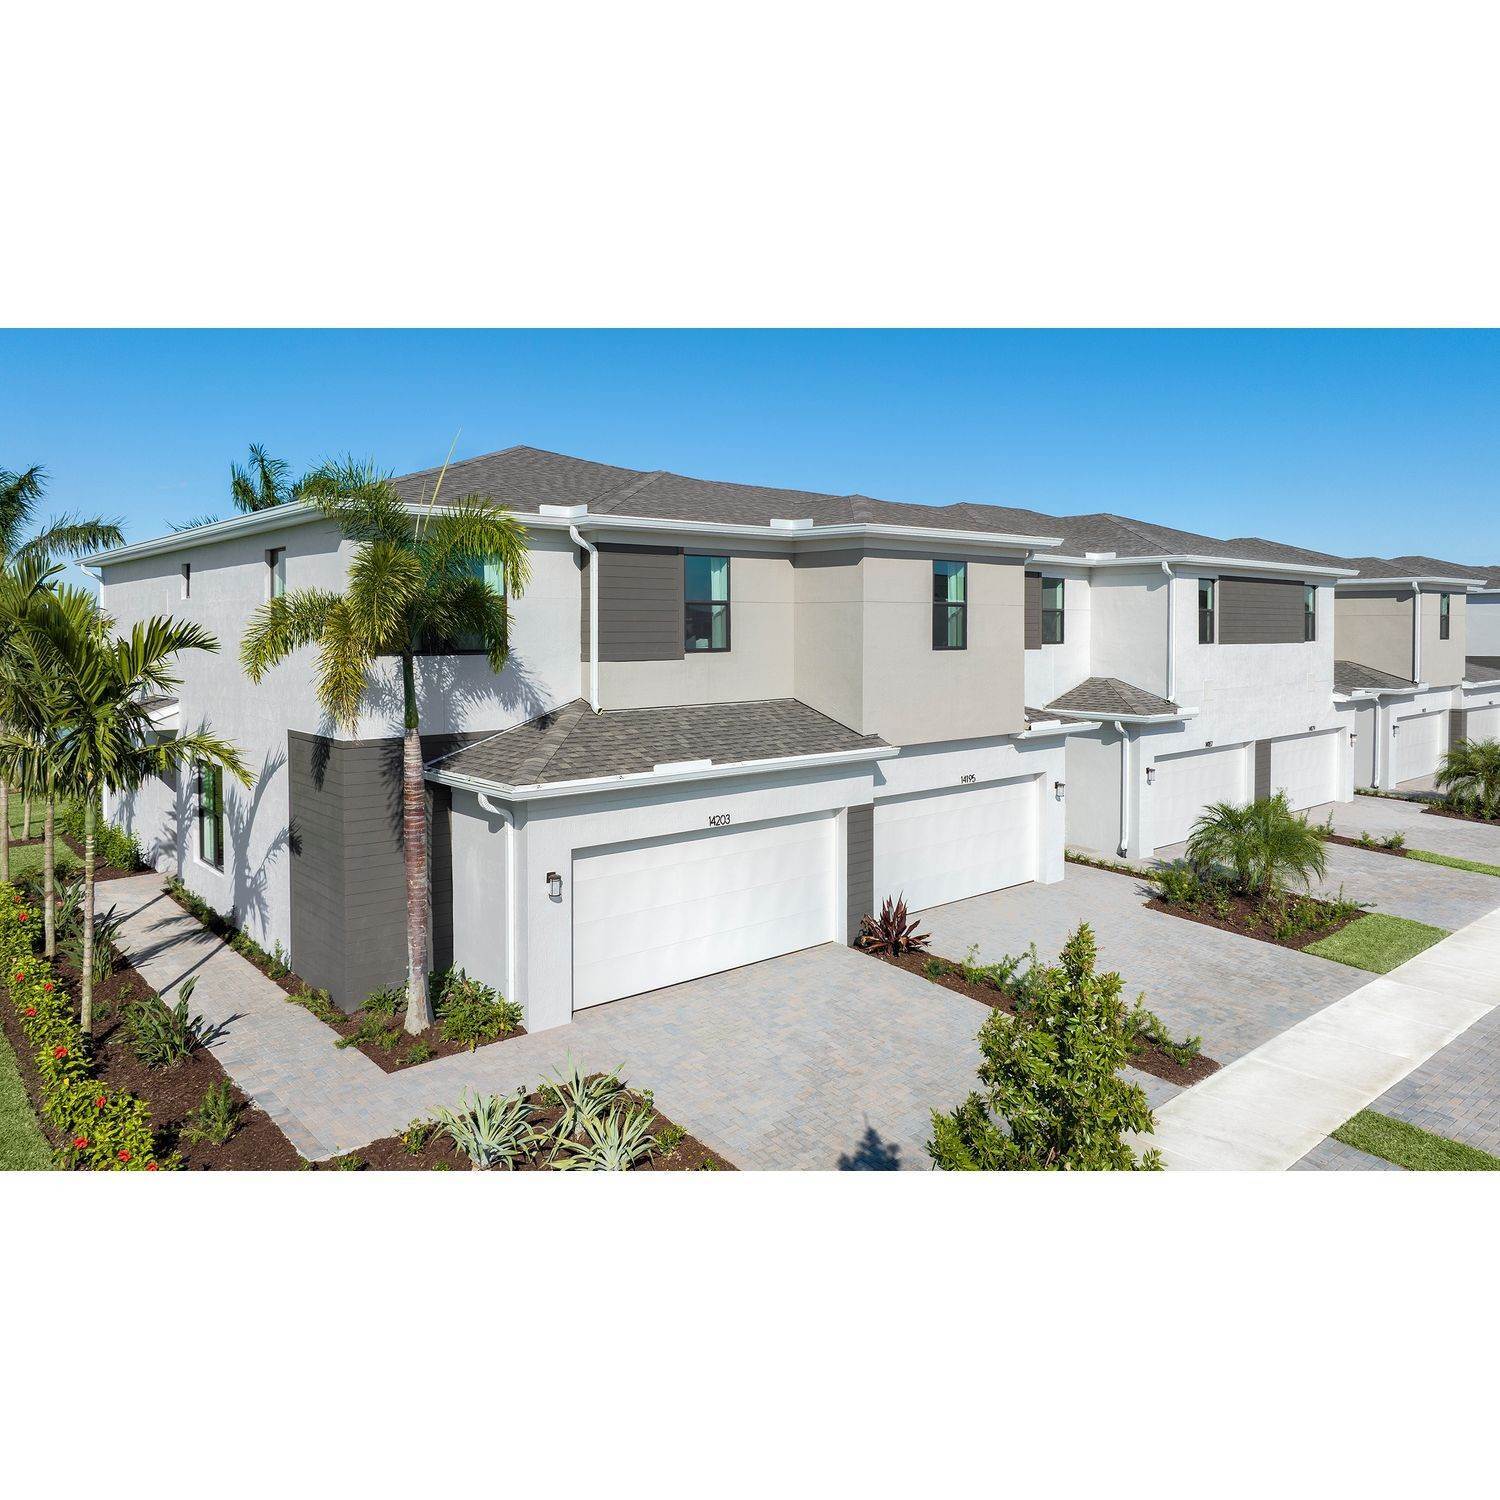 13. Tradition - Cadence - Townhomes Gebäude bei 10455 SW Orana Drive, Port St. Lucie, FL 34987